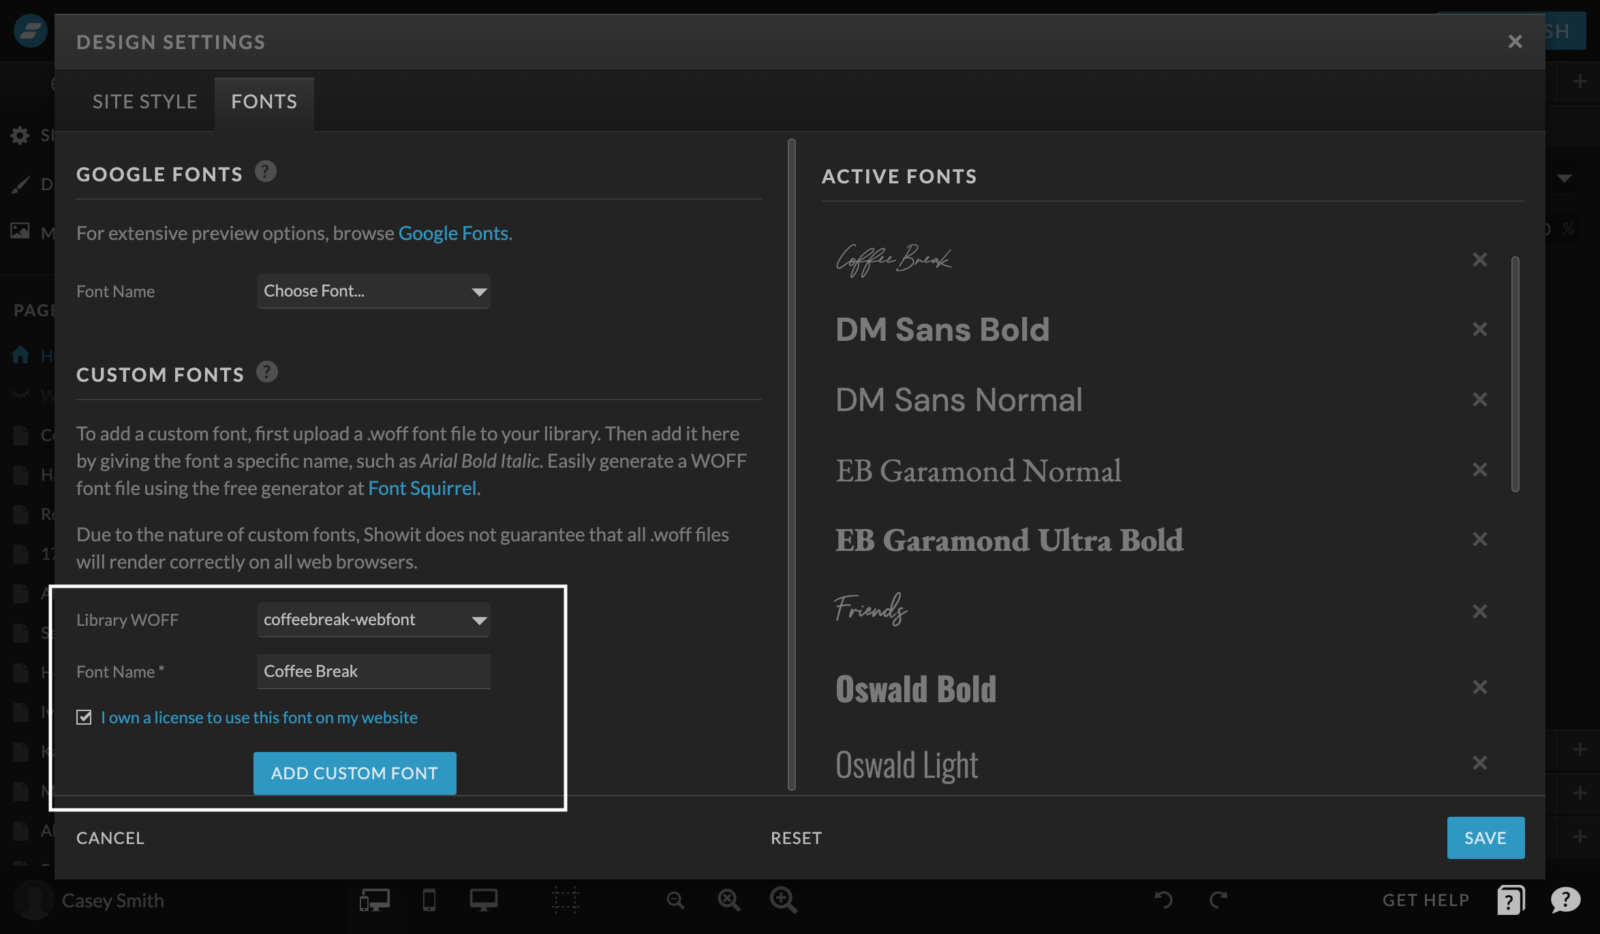 Activate your custom font in the Design Settings